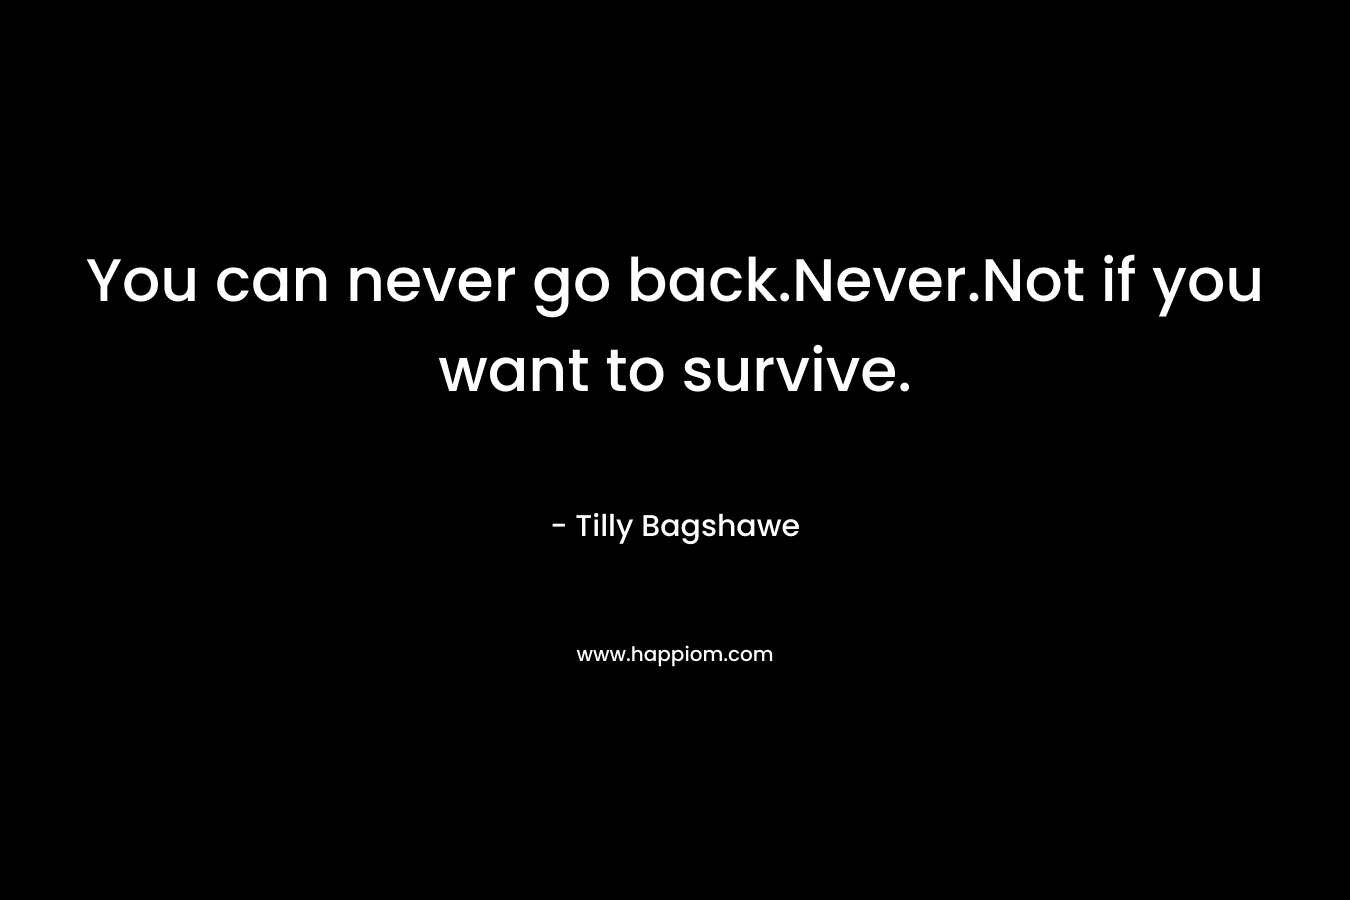 You can never go back.Never.Not if you want to survive.